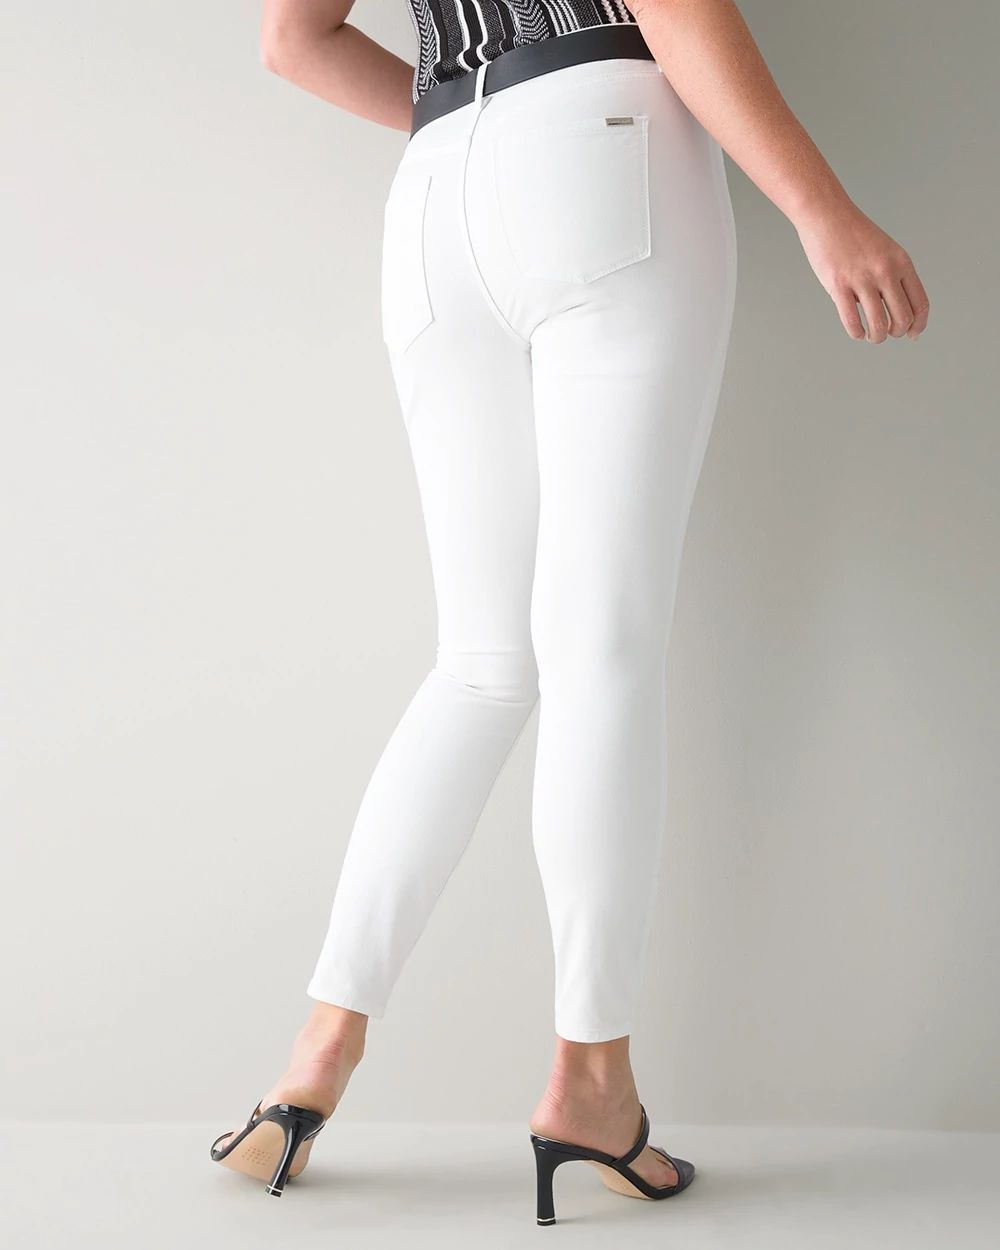 High-Rise Sculpt Skinny Jeans click to view larger image.